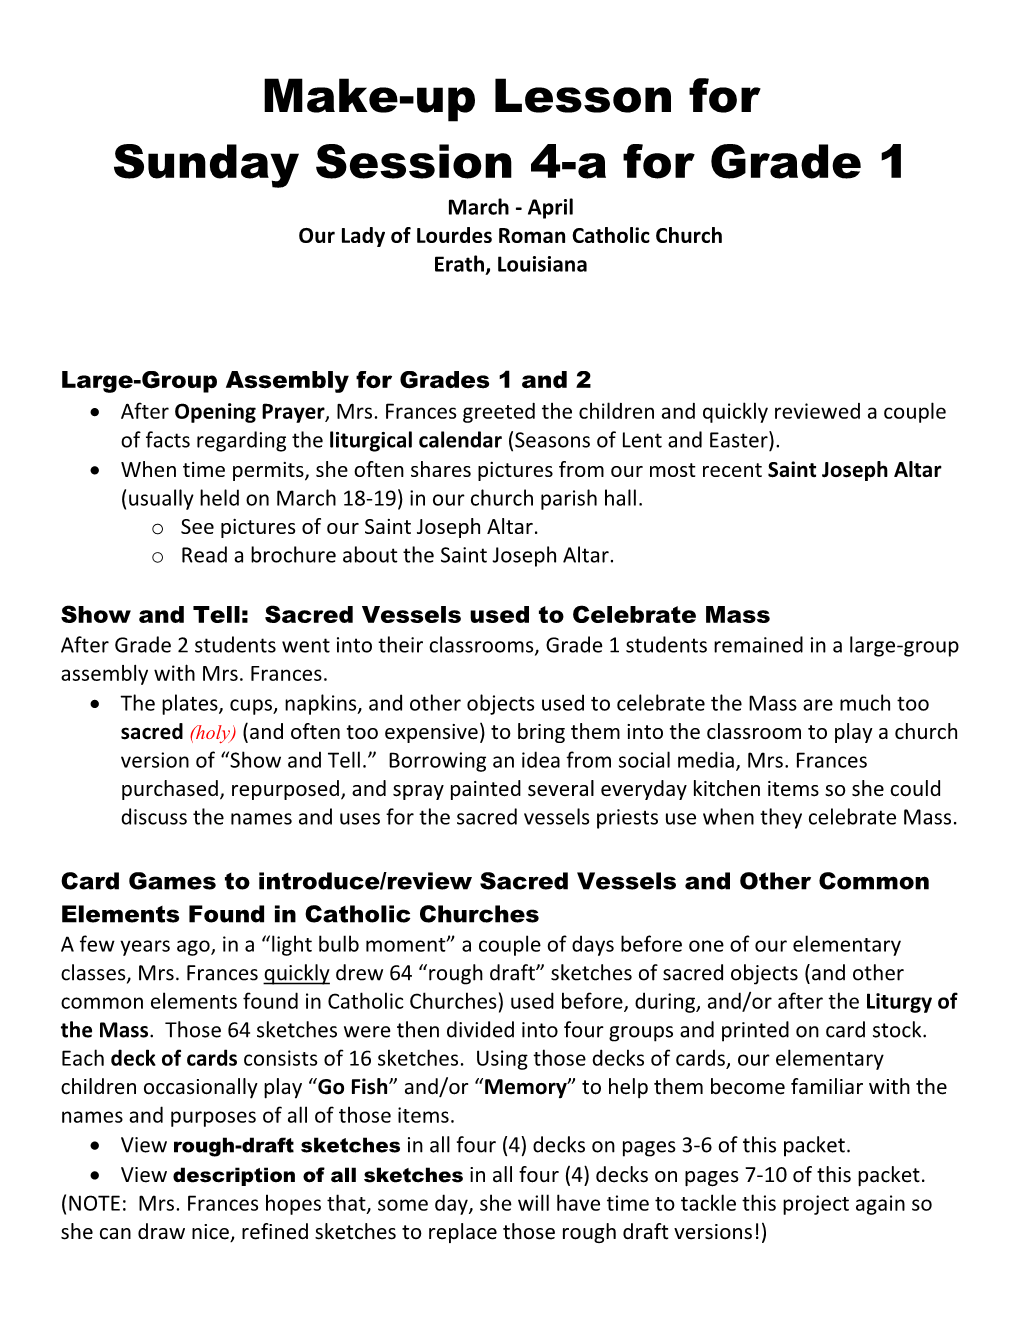 Make-Up Lesson for Sunday Session 4-A for Grade 1 March - April Our Lady of Lourdes Roman Catholic Church Erath, Louisiana